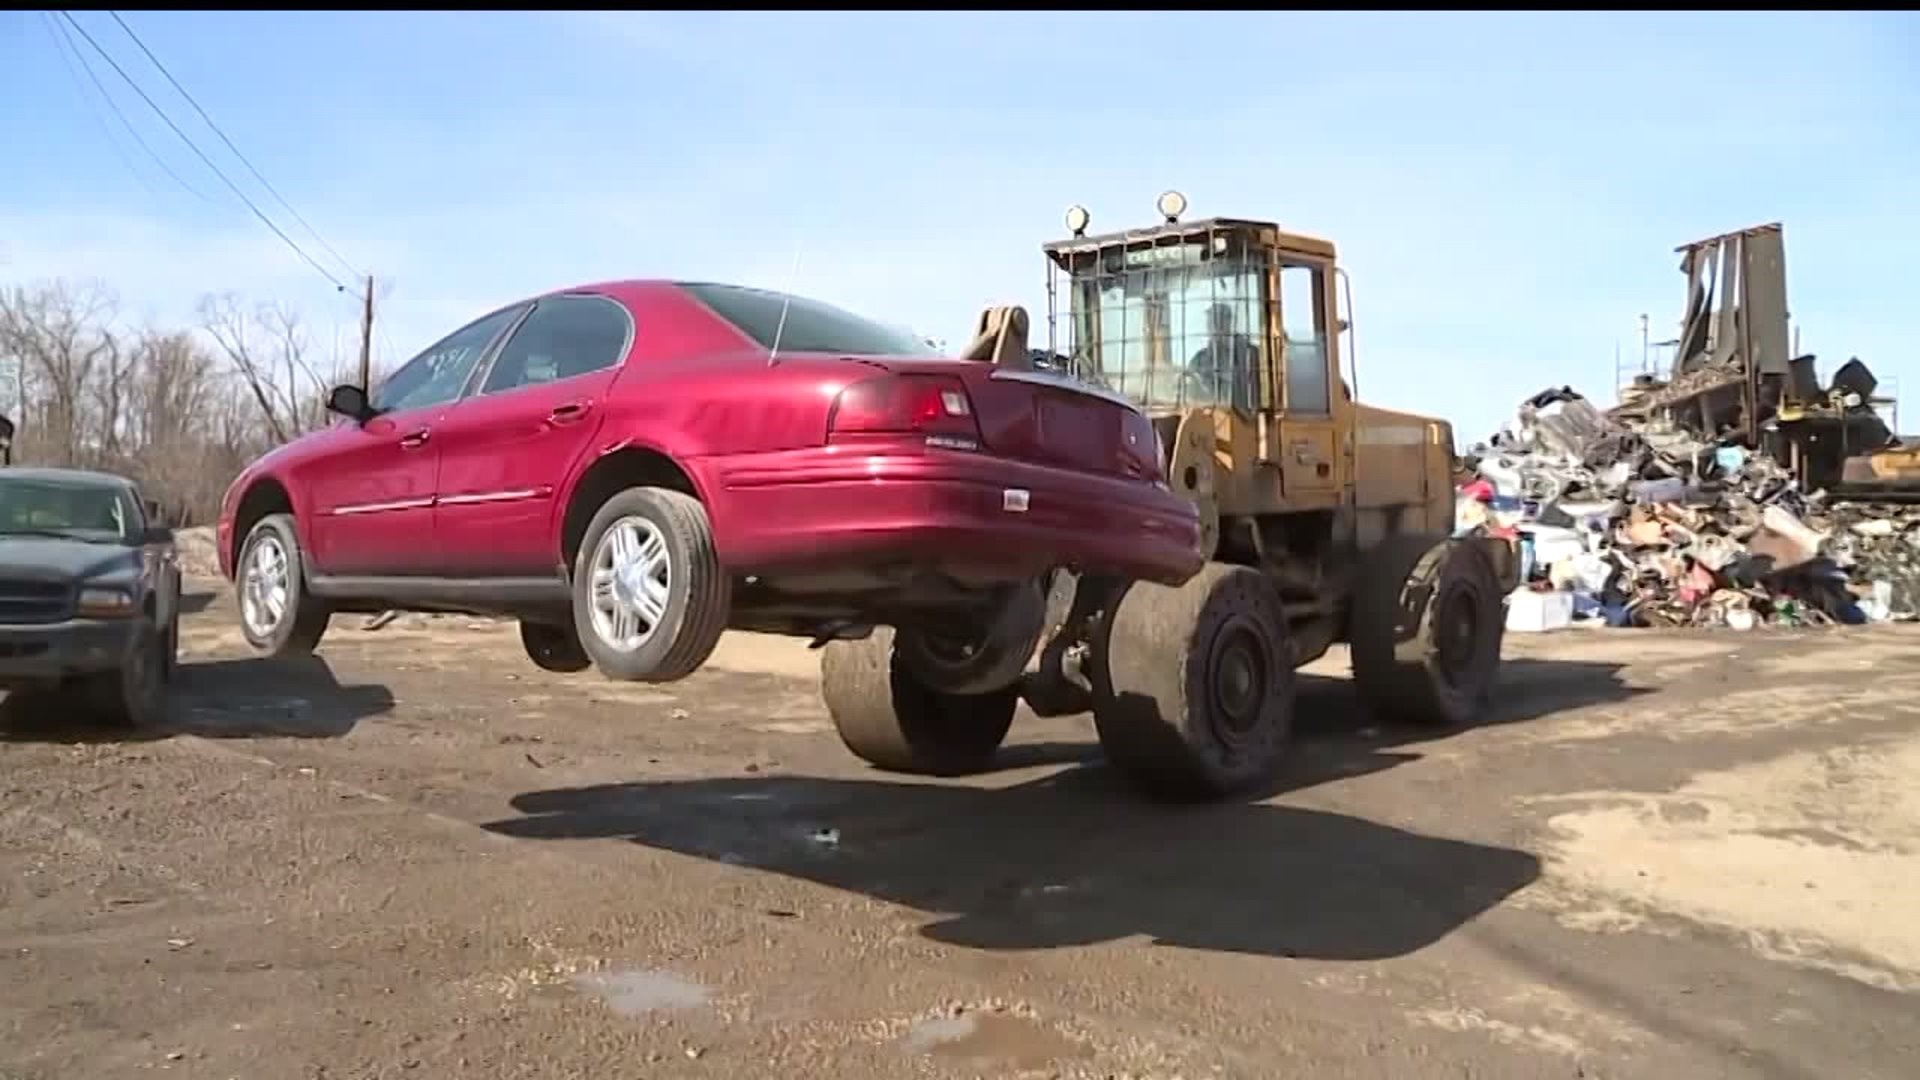 Man says salvage yard to blame for metal through his roof